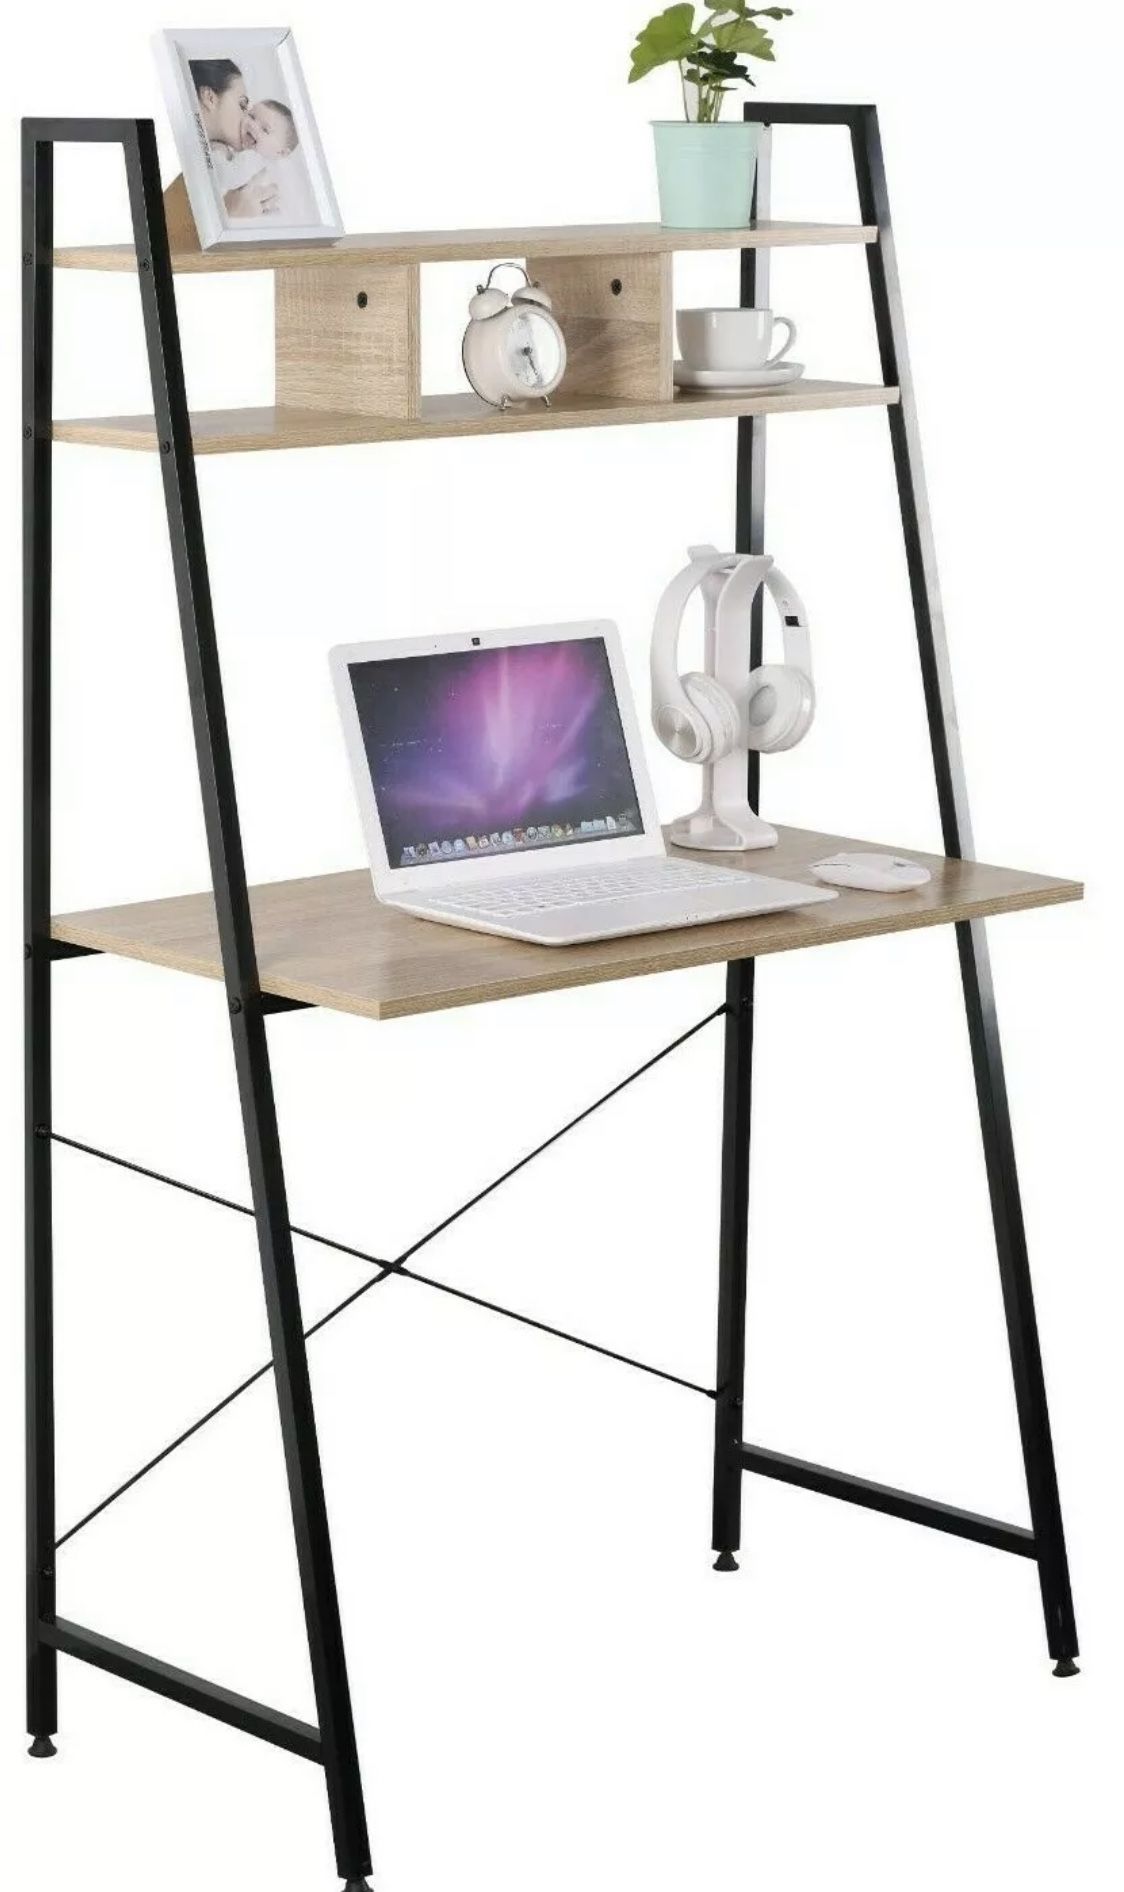 Modern Student Home Office Bedroom Wooden Desk With Iron Frame